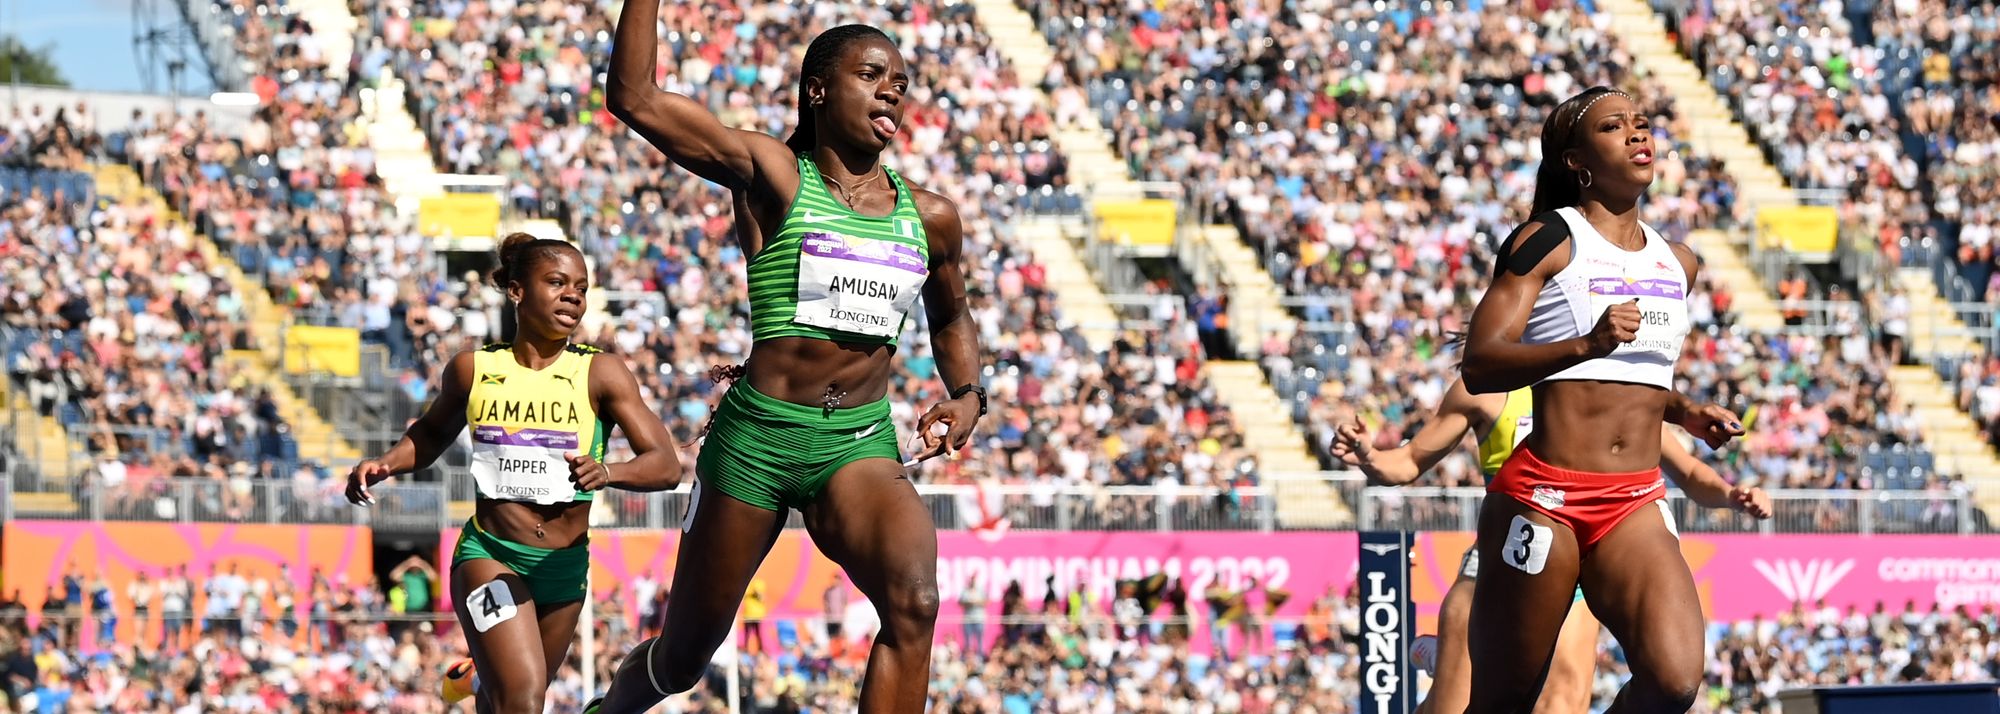 Amusan's 12.30 one of several Games record on the final day of athletics action in Birmingham